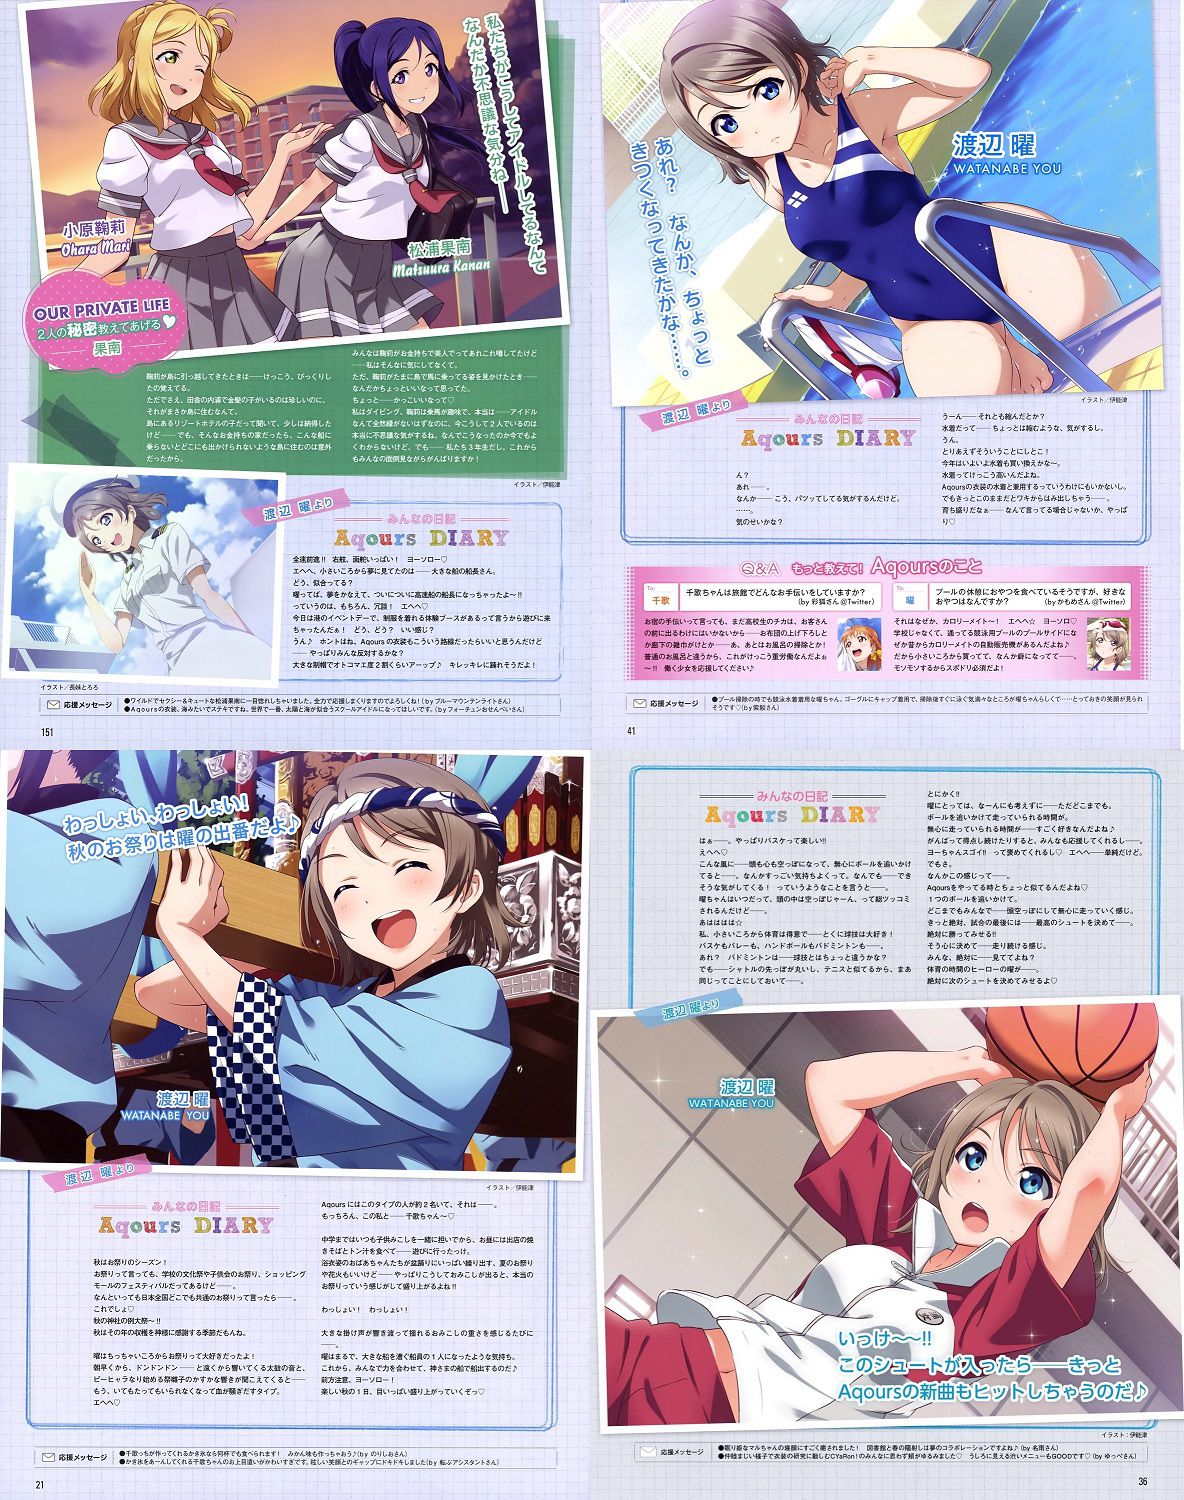 [Image is: "love live! Sunshine ' with everyone's favorite anime wwwwwwwww 8